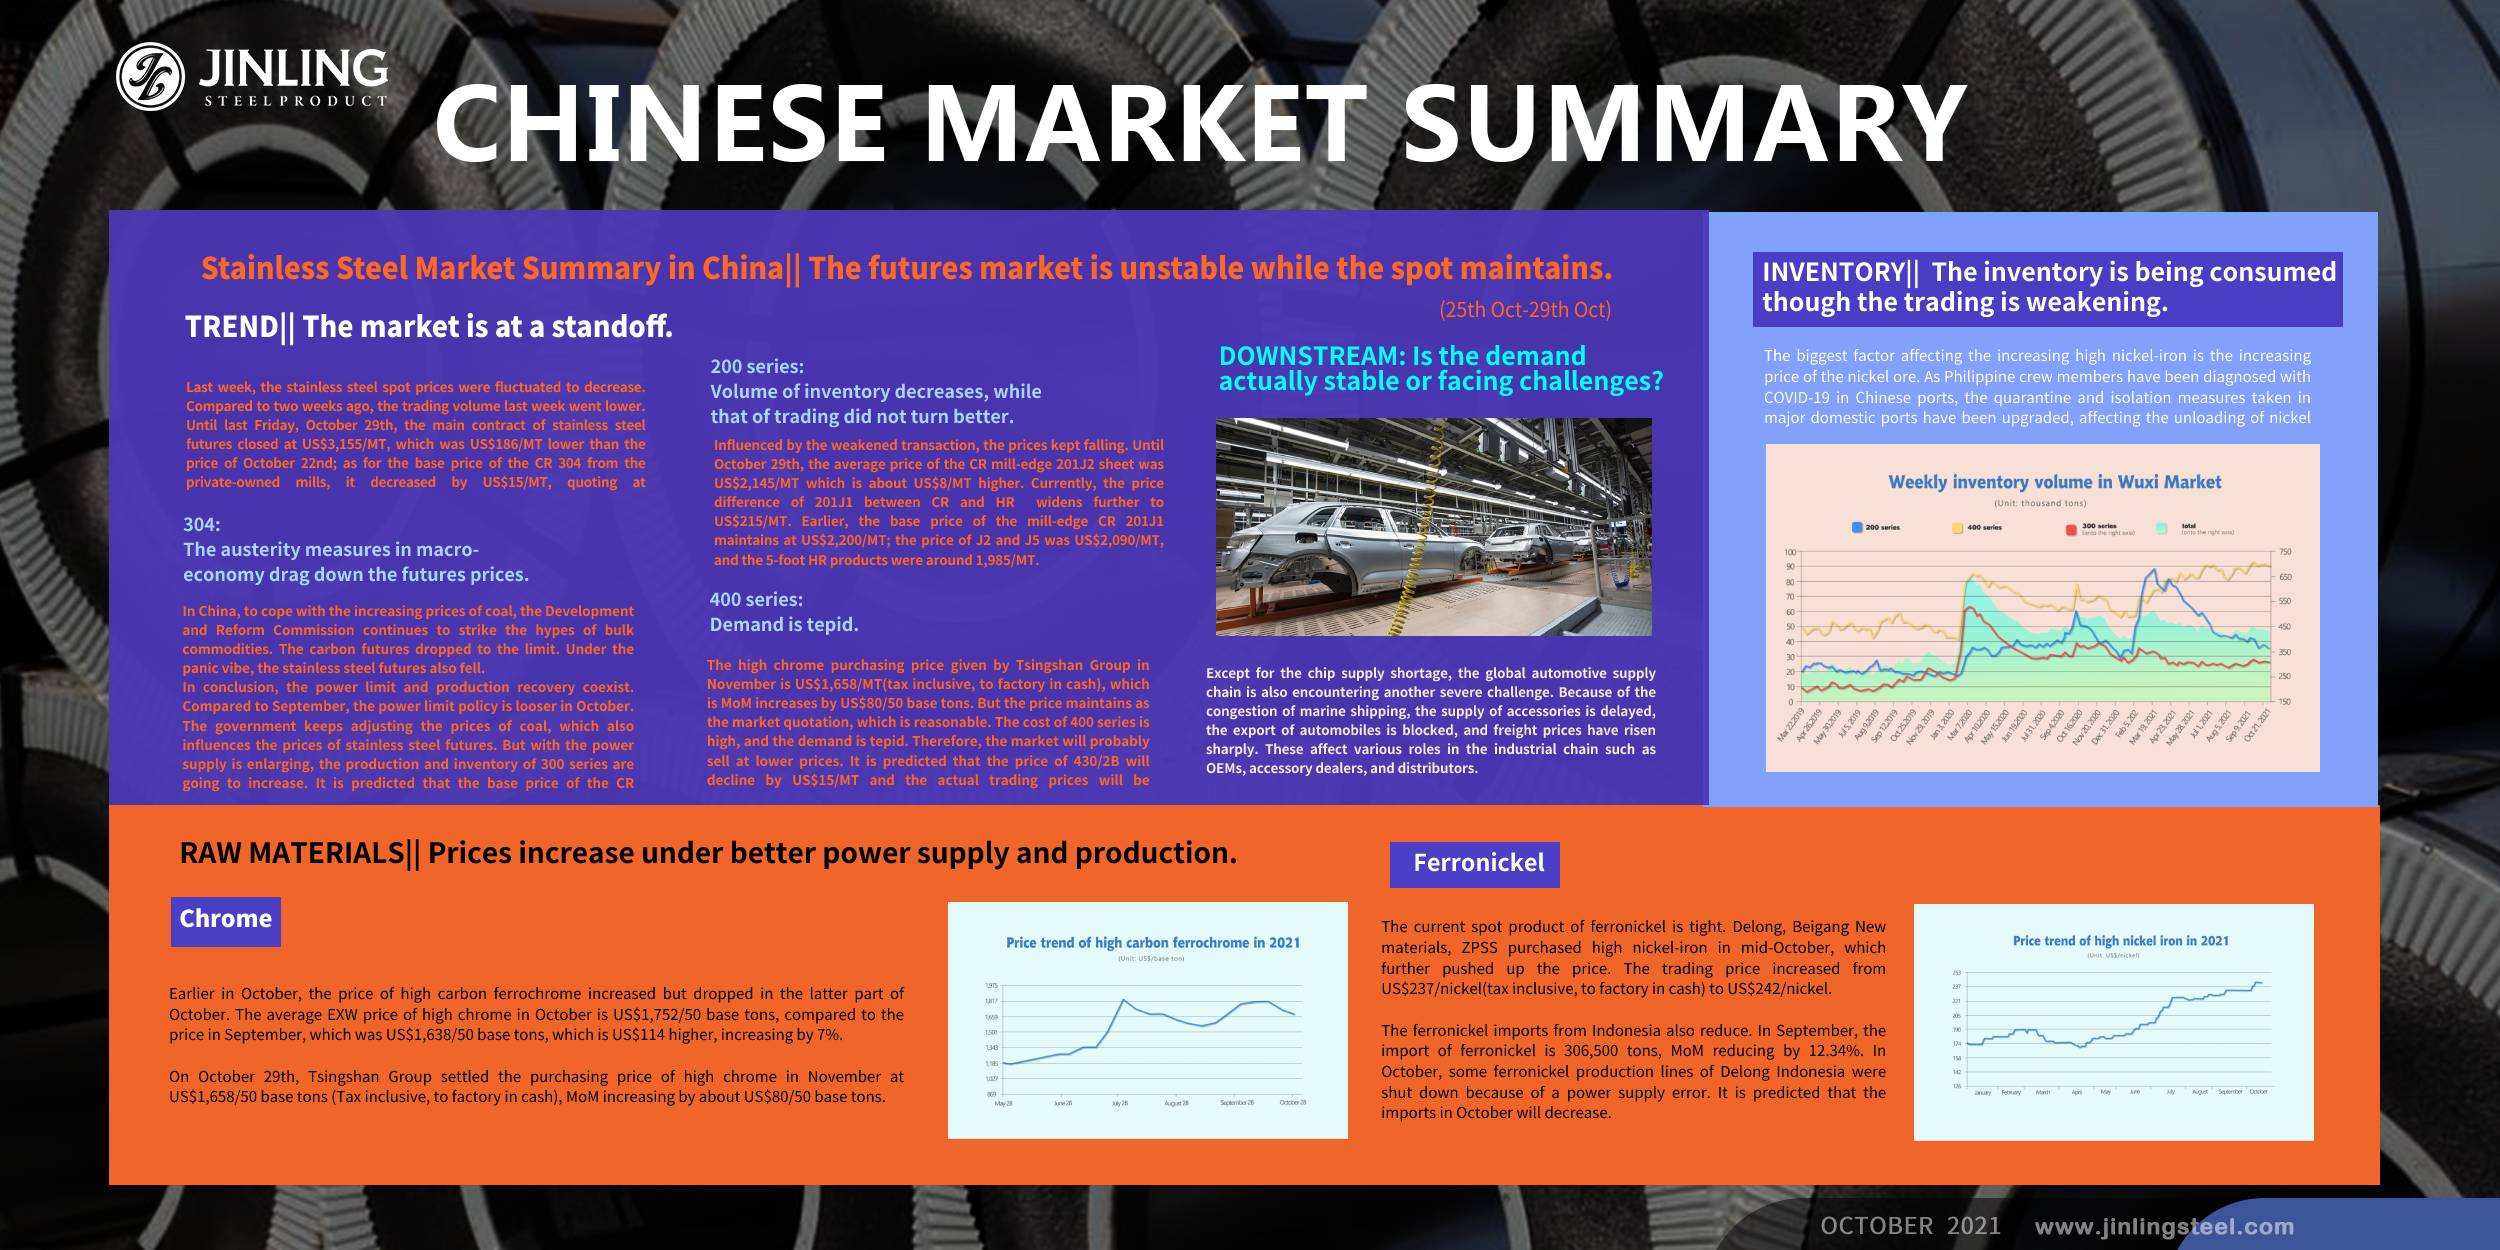 Stainless Steel Market Summary in China|| The futures market is unstable while the spot maintains.  (25th Oct-29th Oct)